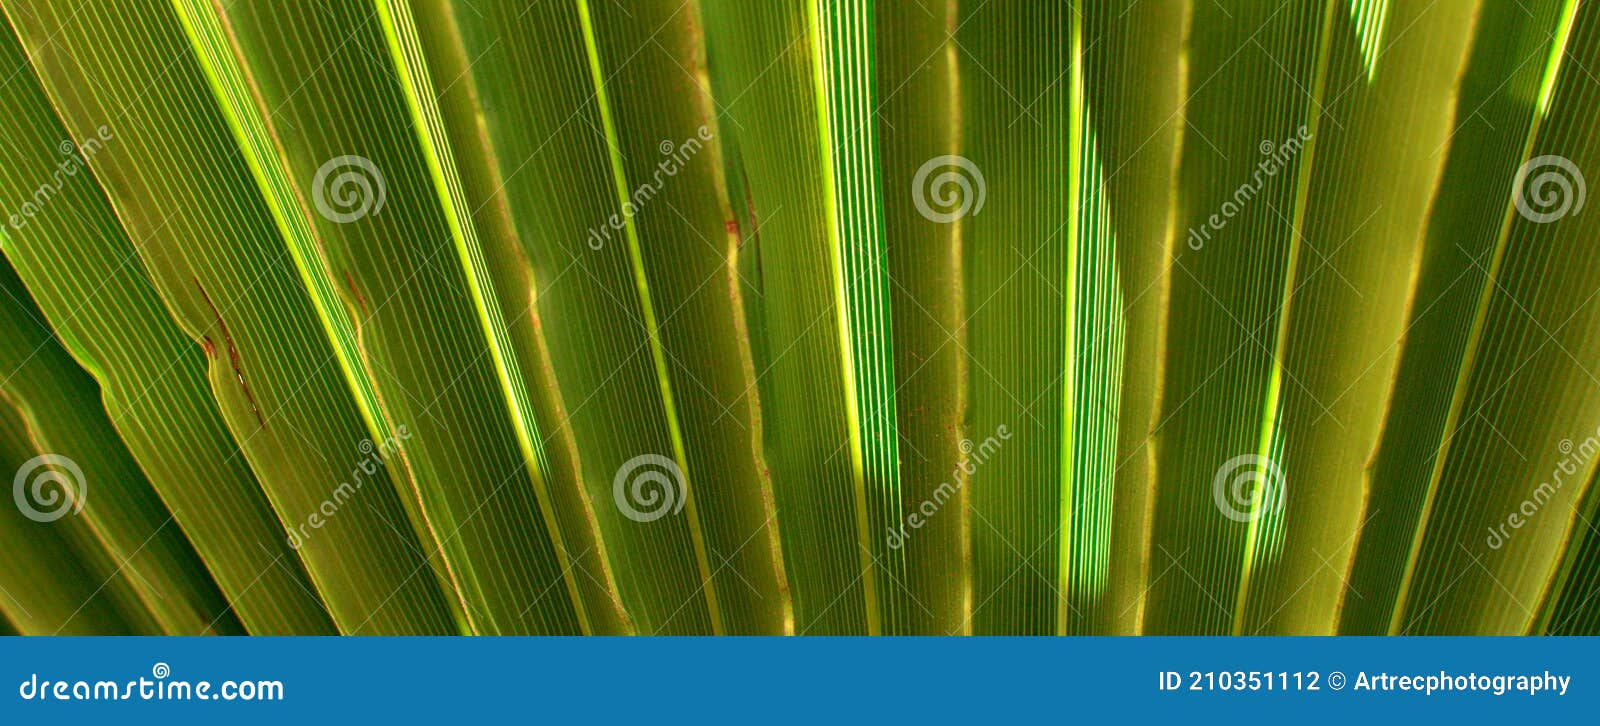 green palm tree close up background - gofre leaf wallpaper